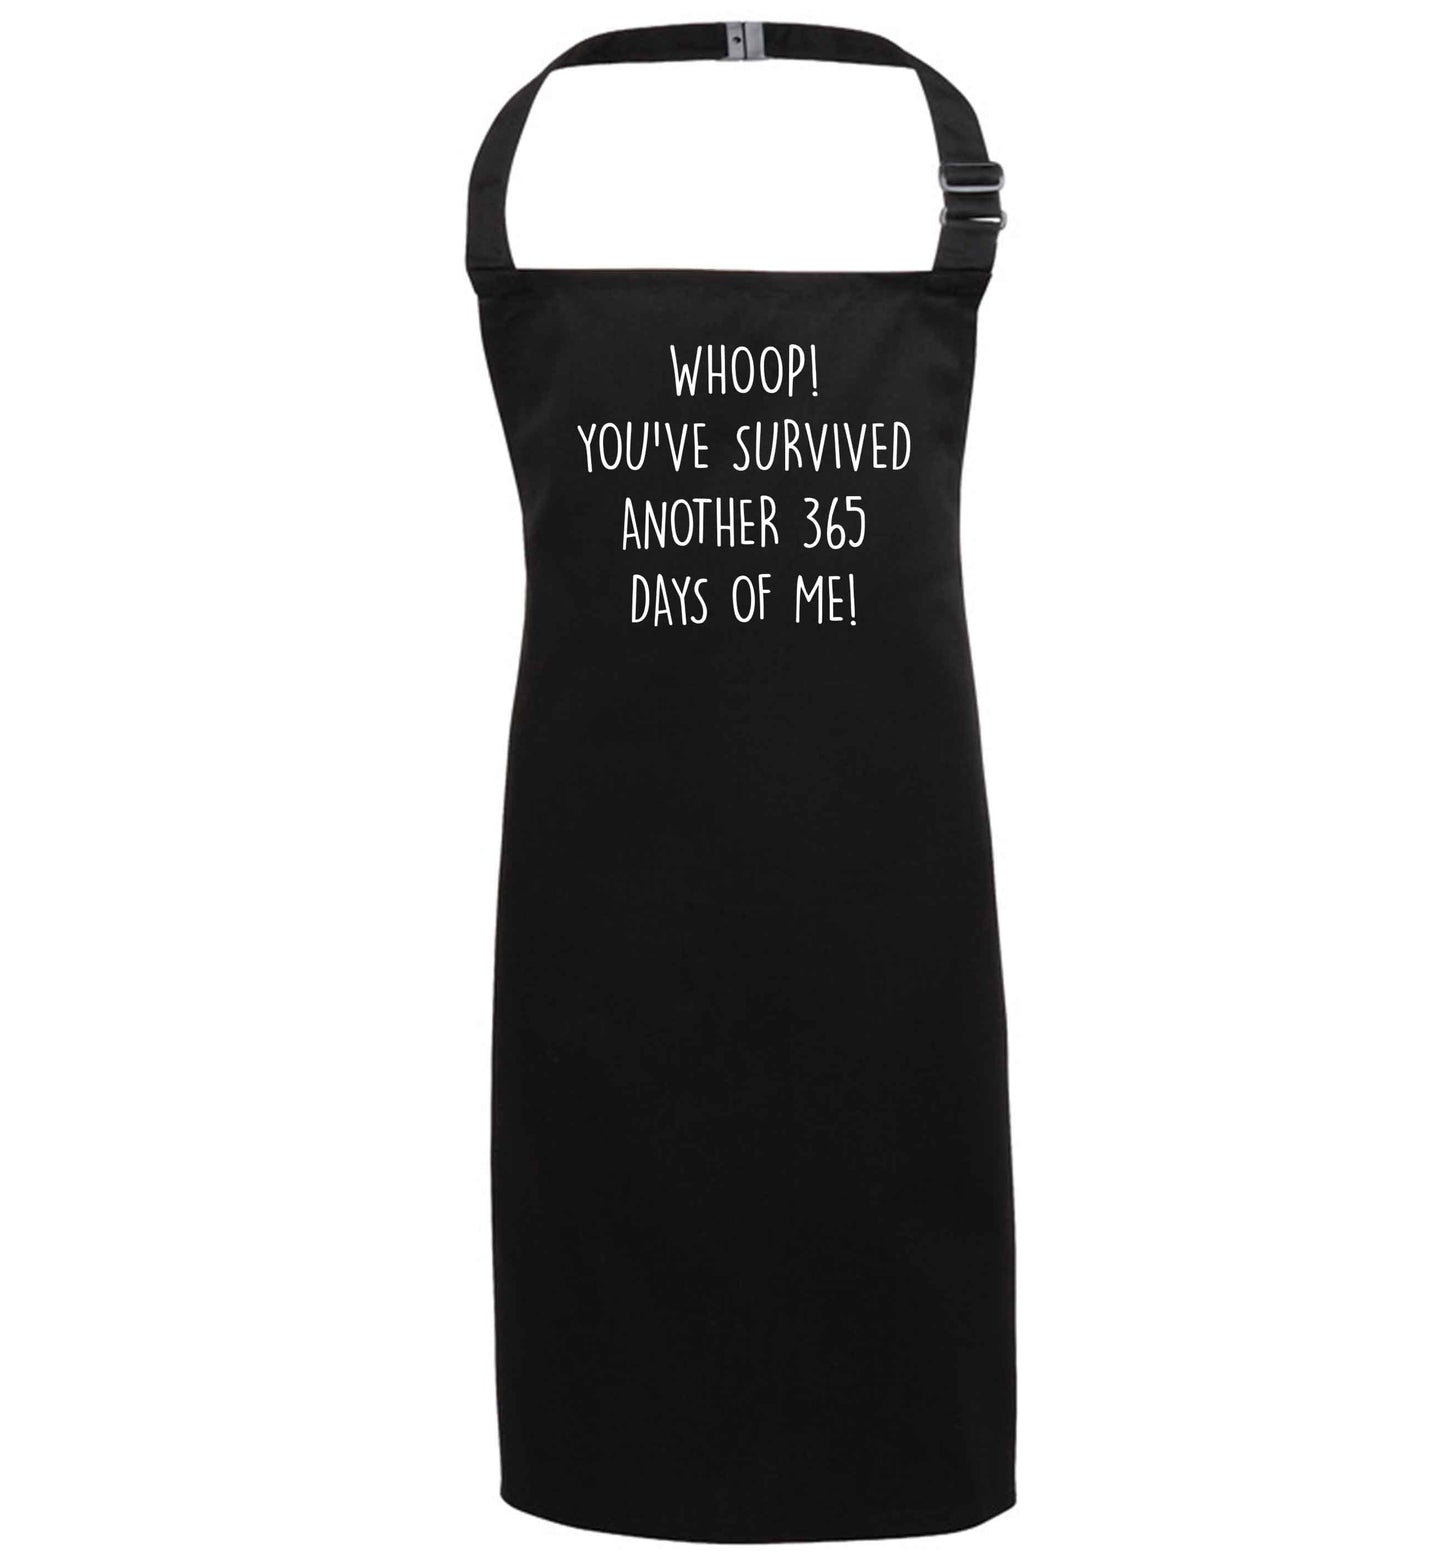 Whoop! You've survived another 365 days with me! black apron 7-10 years